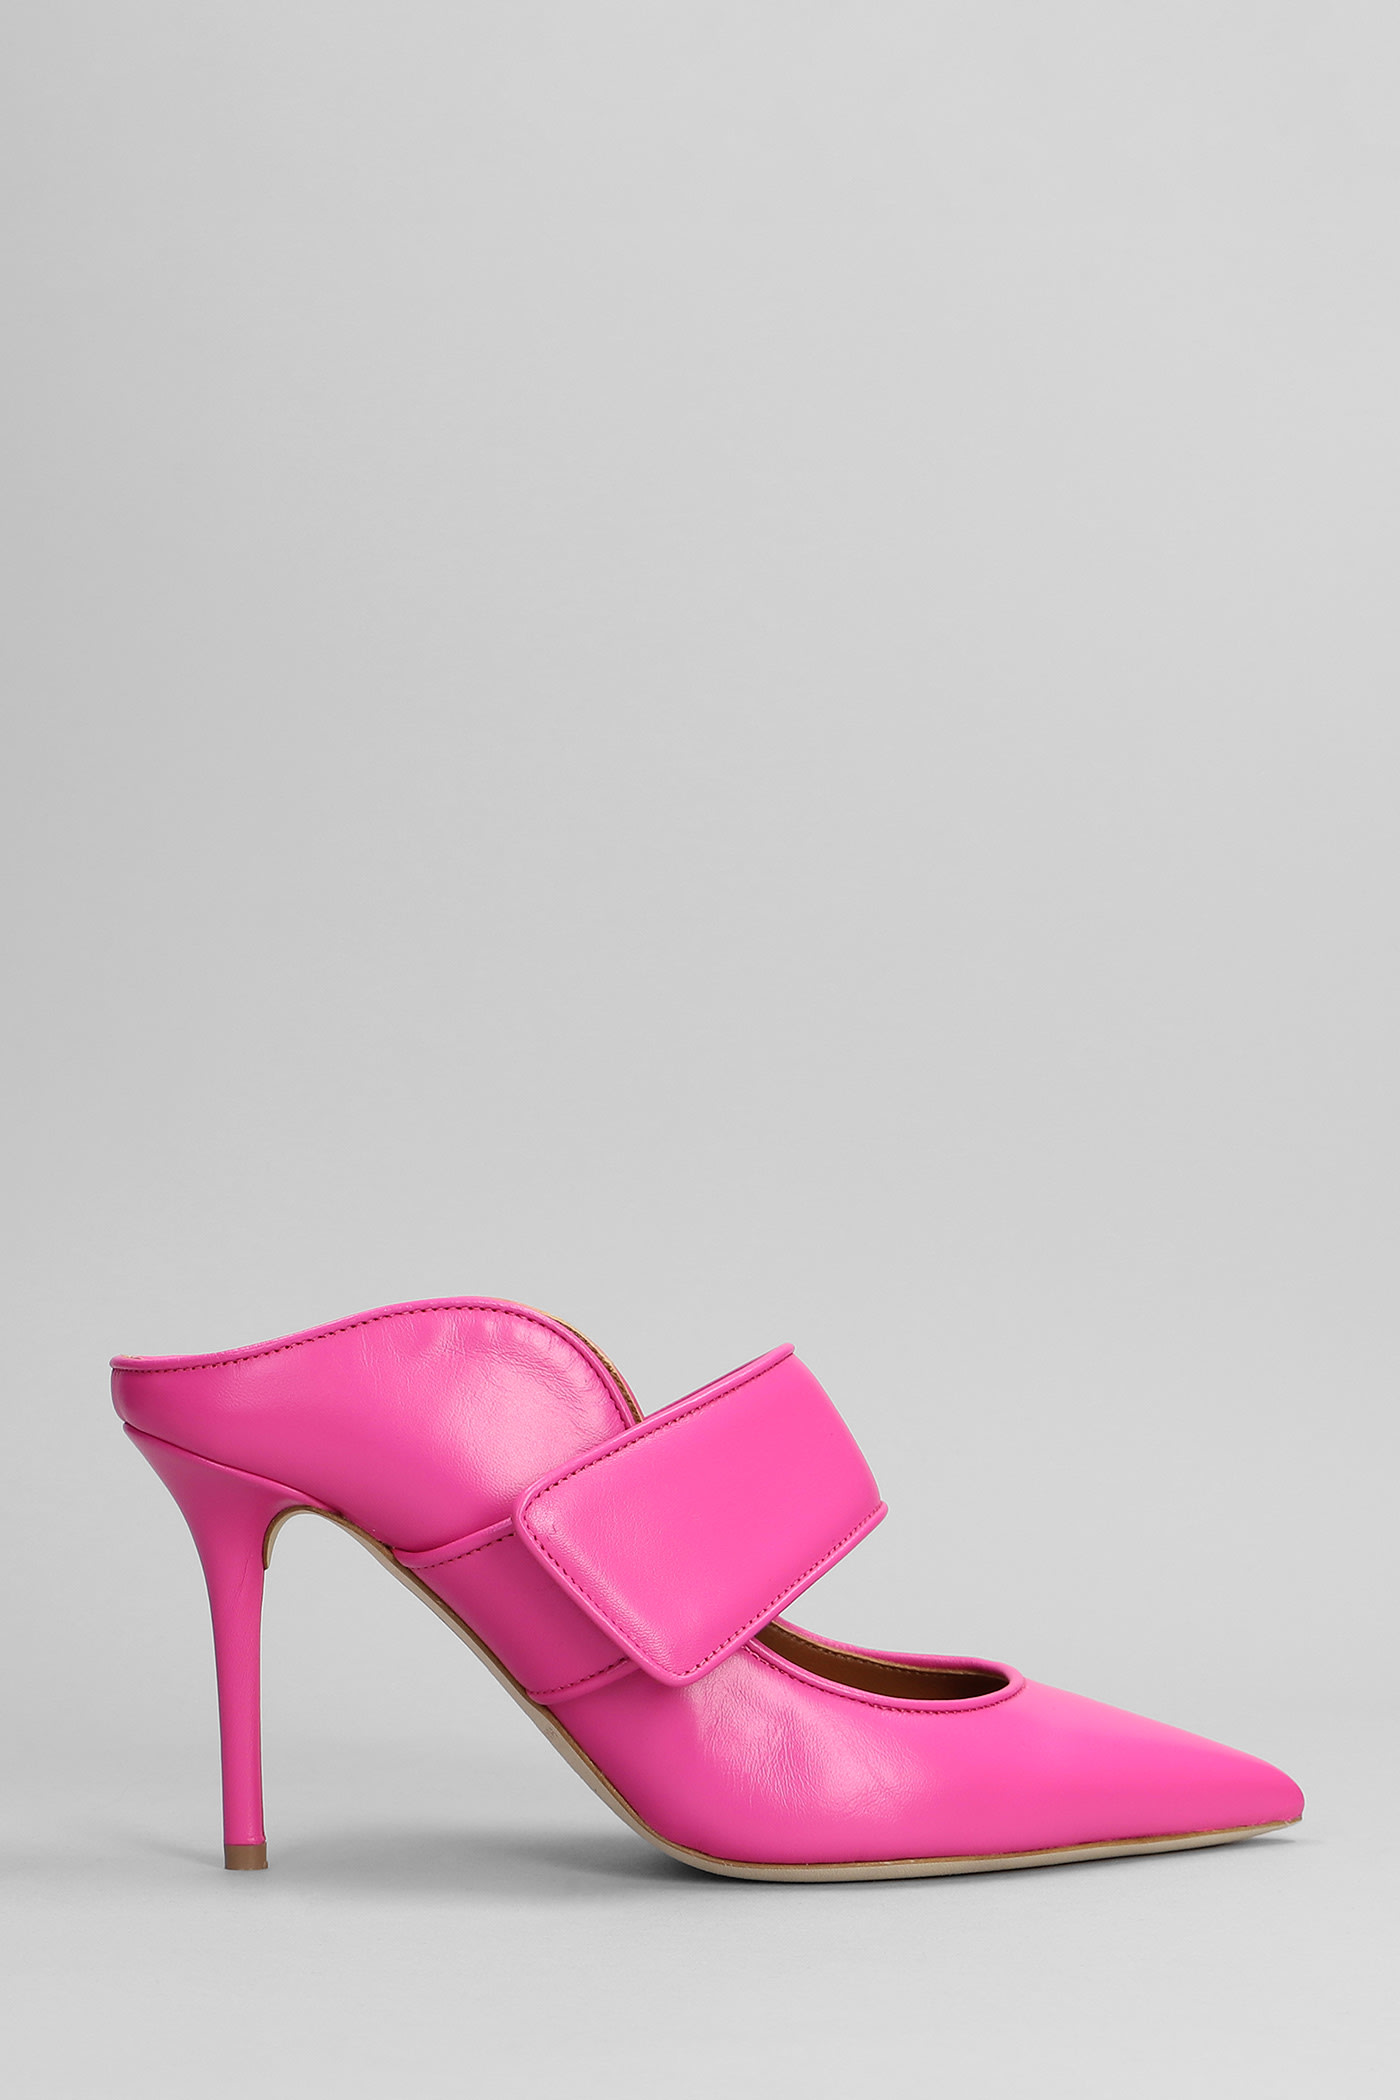 MALONE SOULIERS HELENE PUMPS IN ROSE-PINK LEATHER